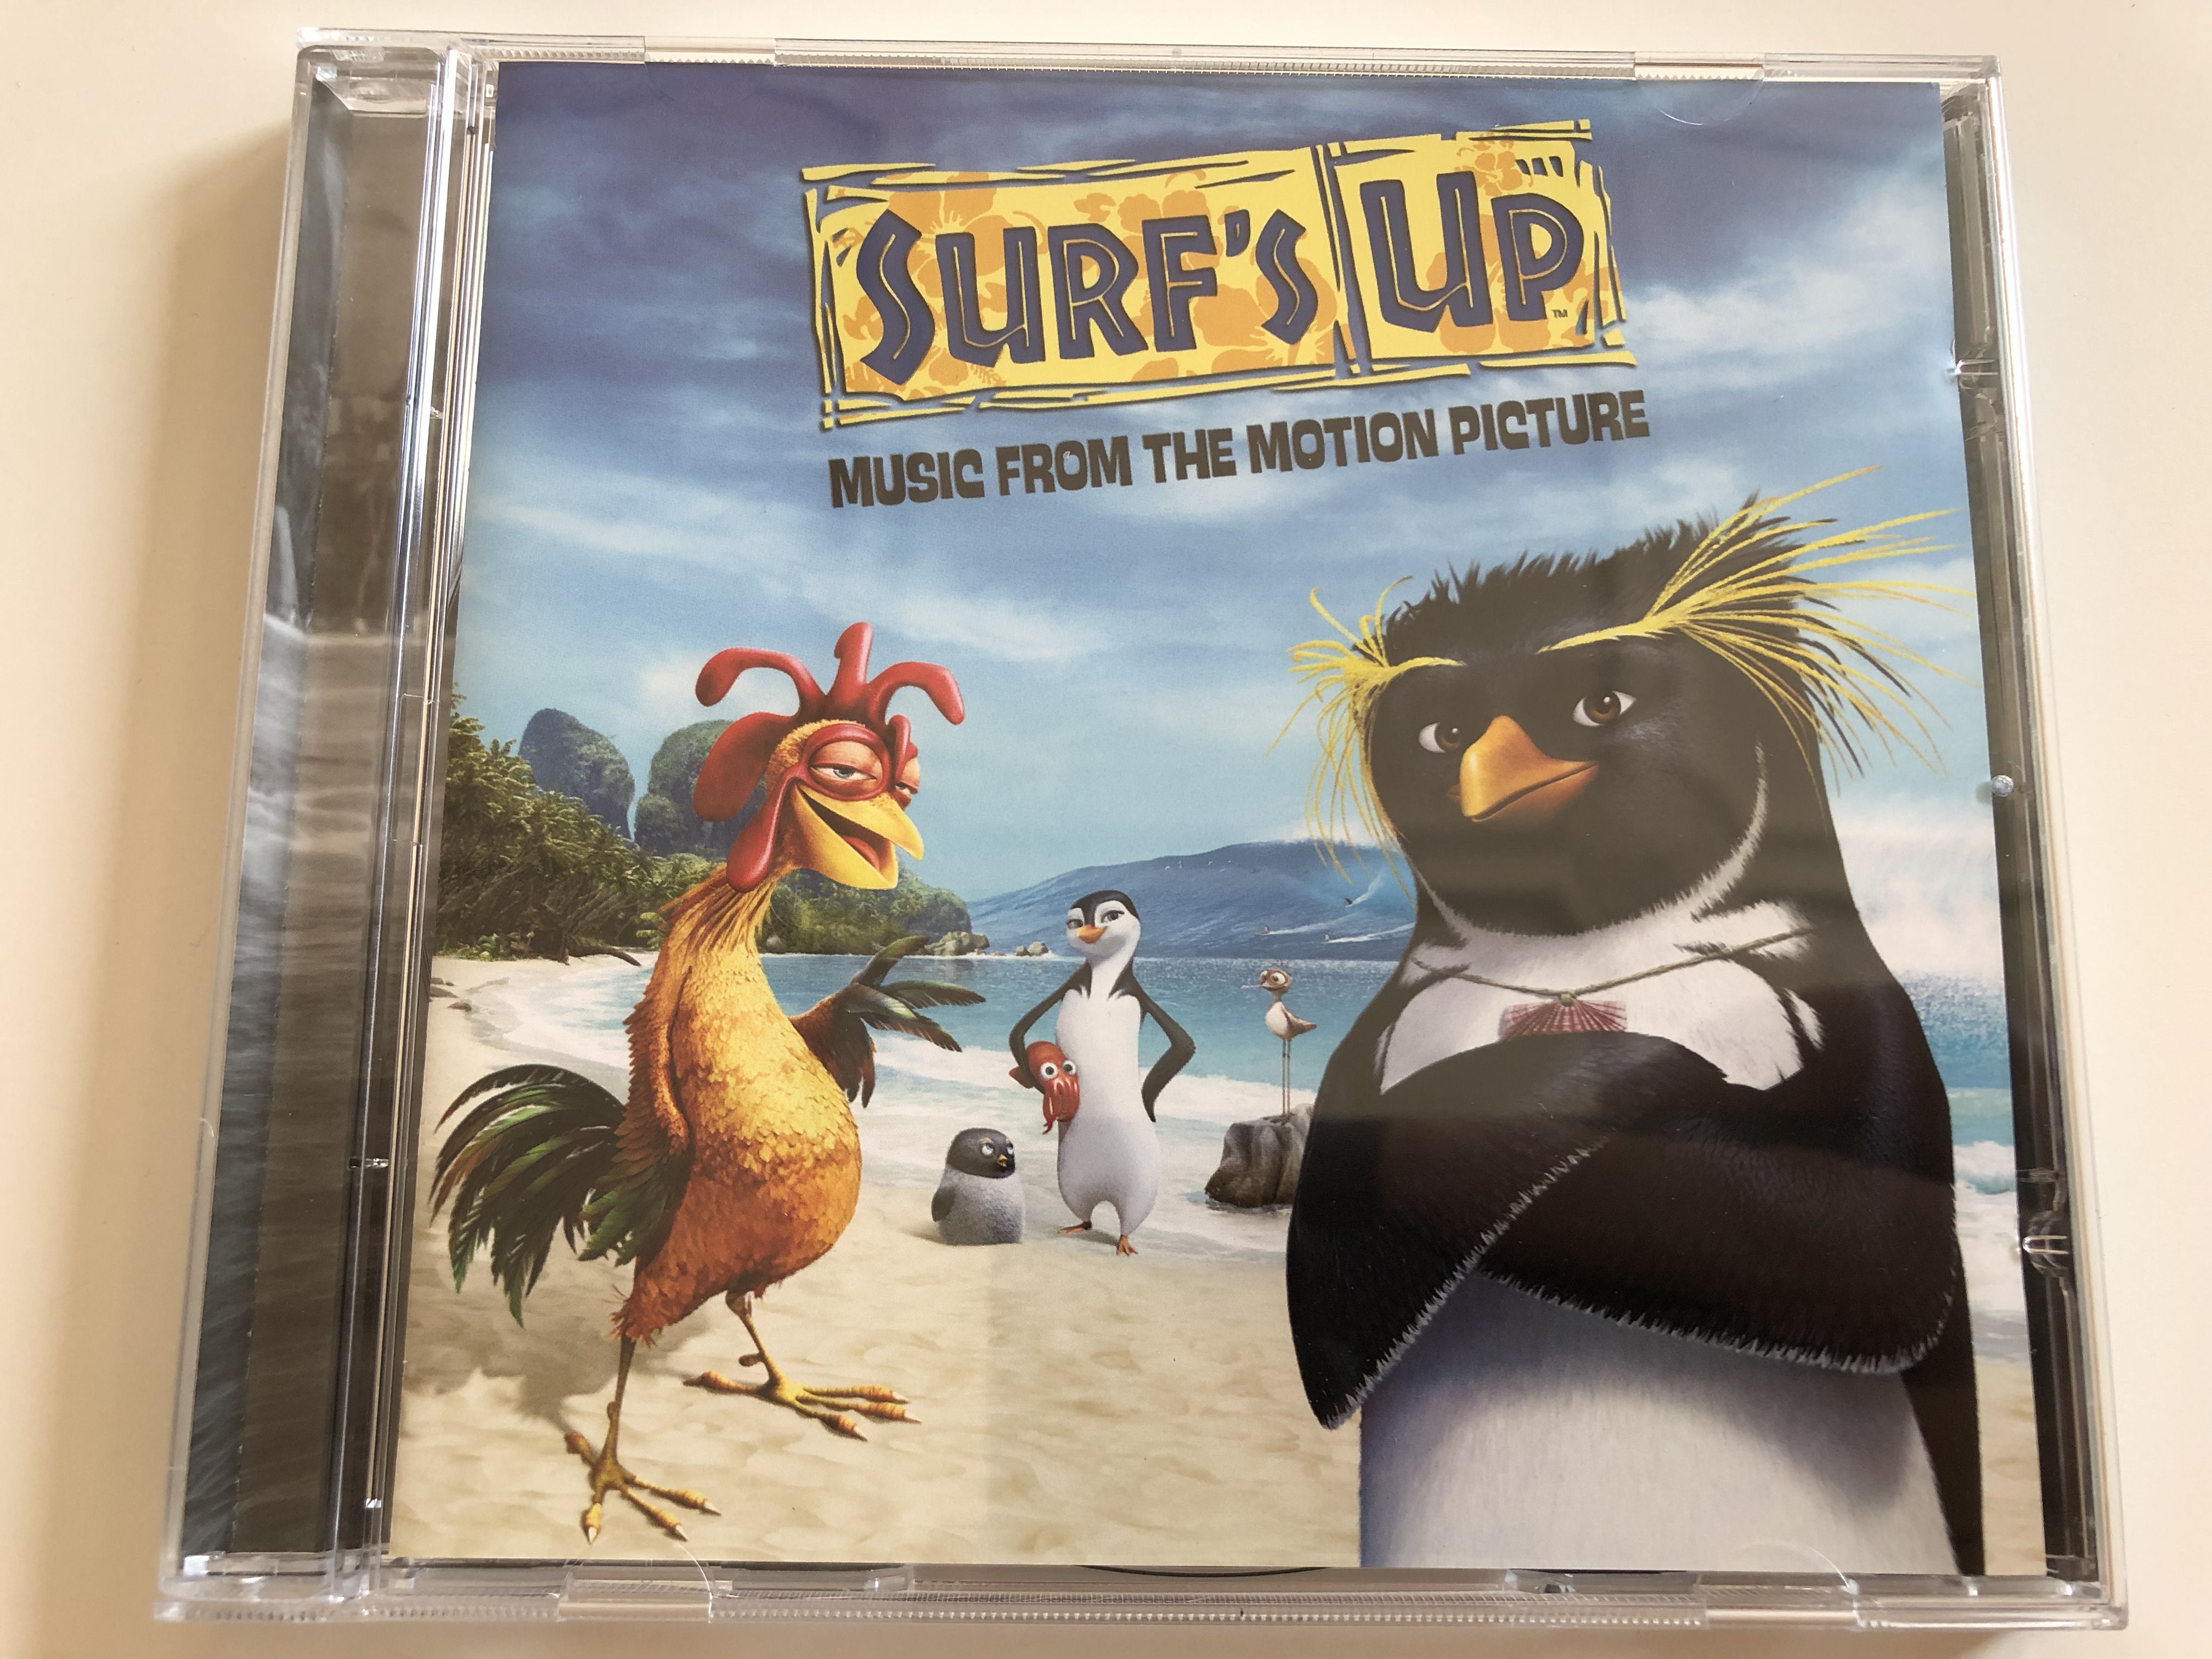 surf-s-up-music-from-the-motion-picture-sony-music-soundtrax-audio-cd-2007-88697153962-1-.jpg